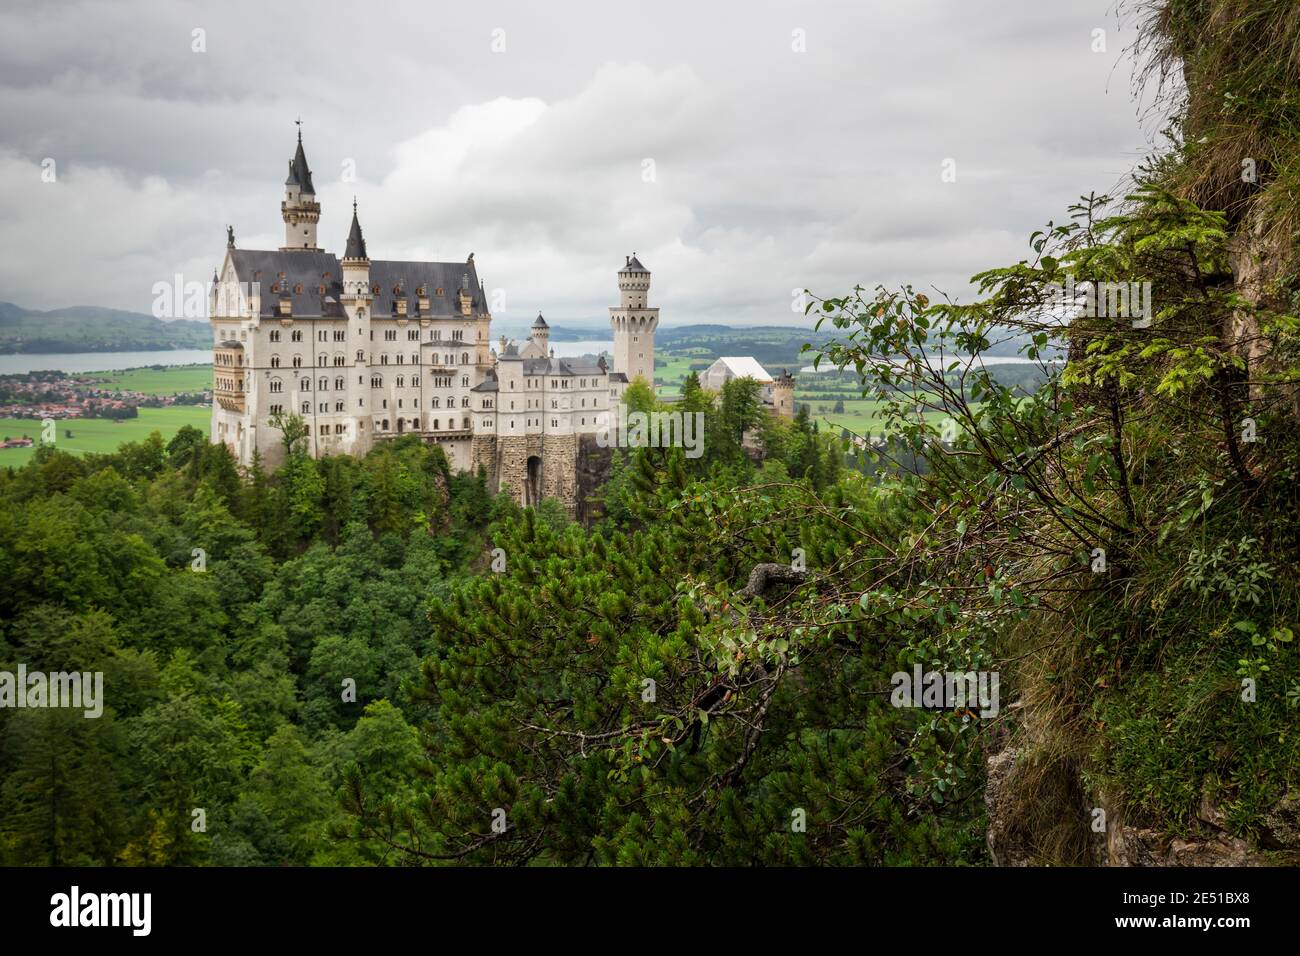 Wide angle view of a German landscape with an ancient castle in the foreground, against a dark cloudy sky Stock Photo